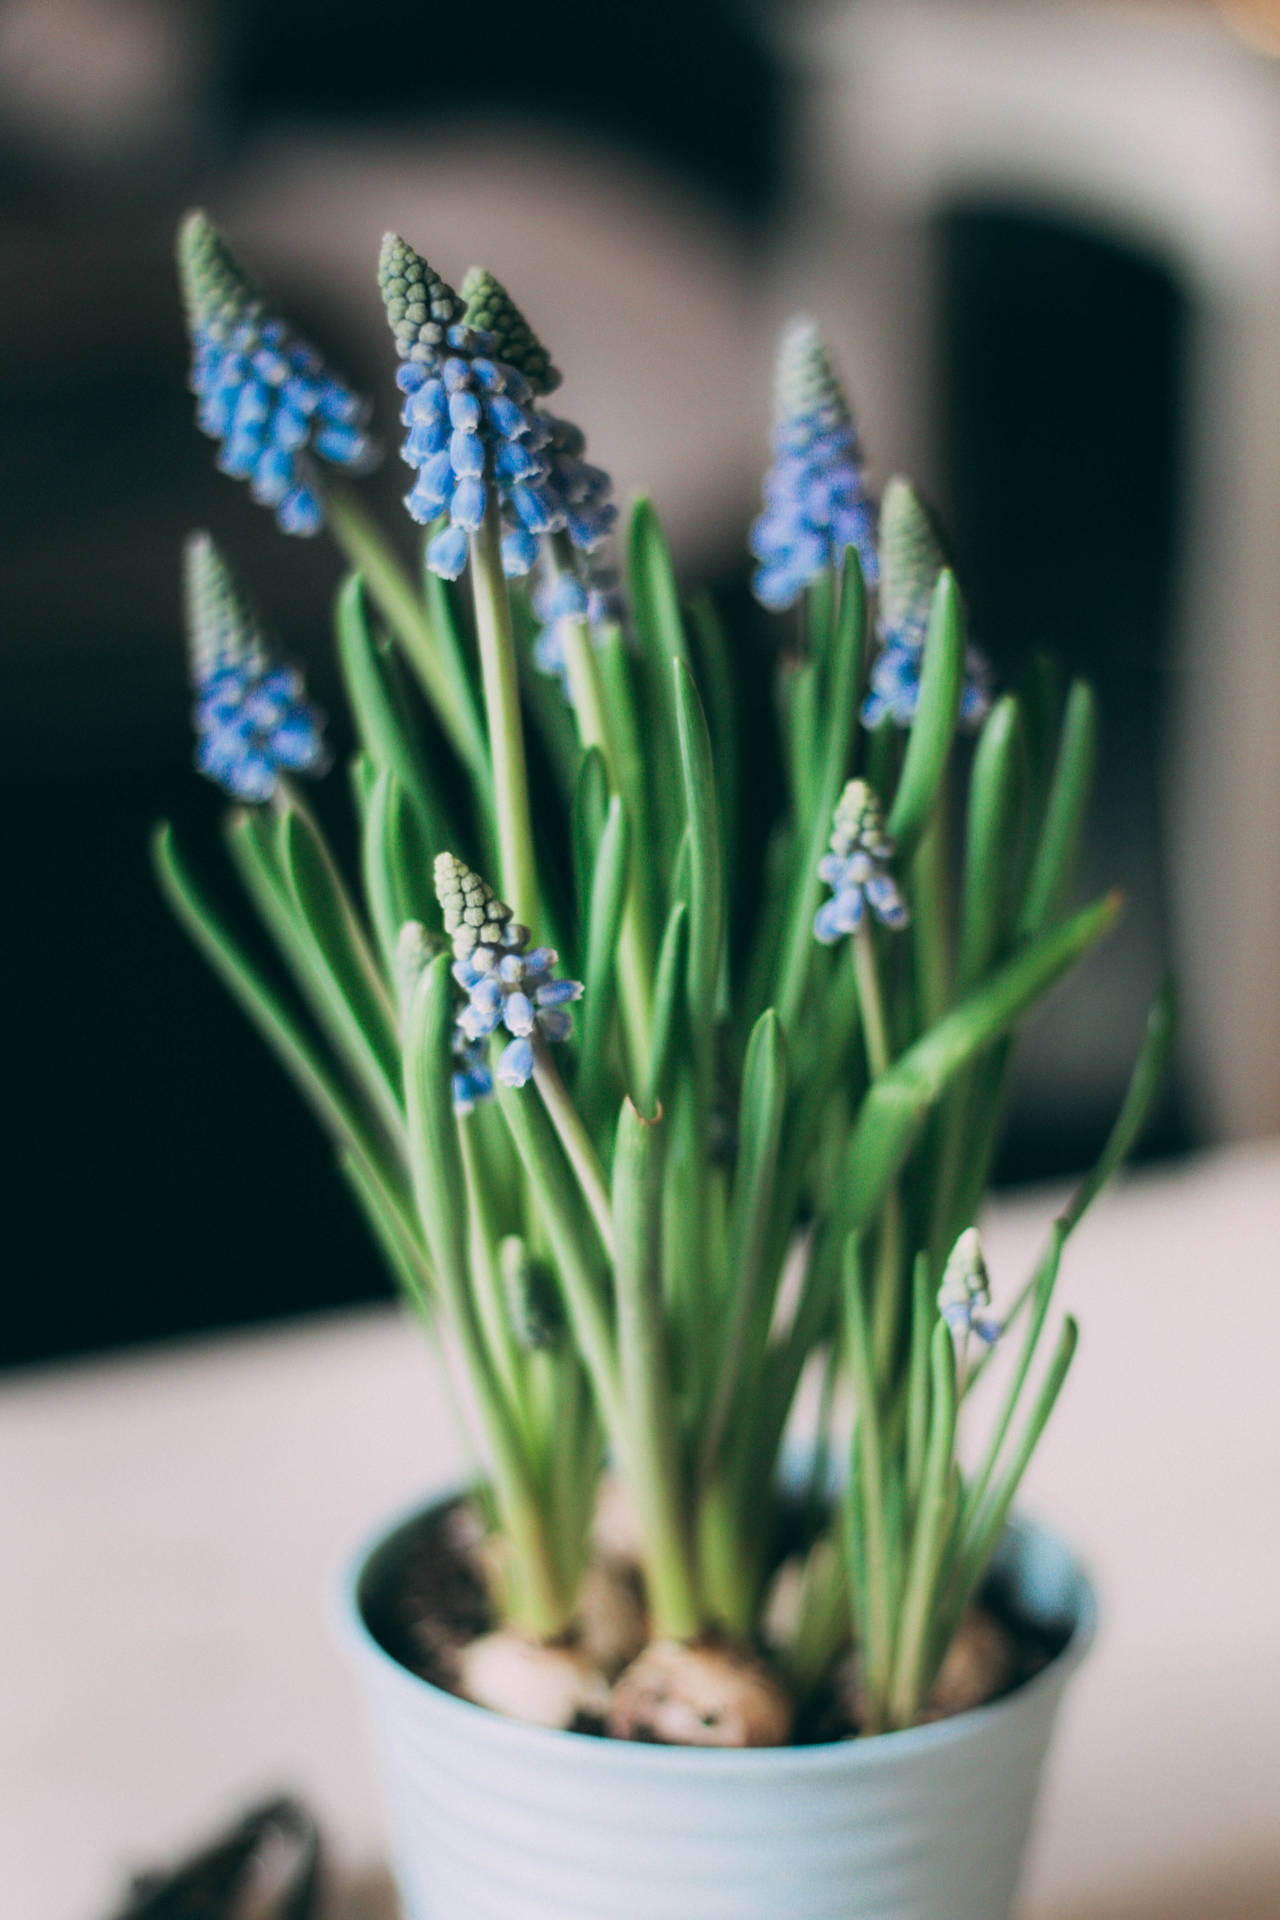 Young Blue Hyacinth Flowers Background